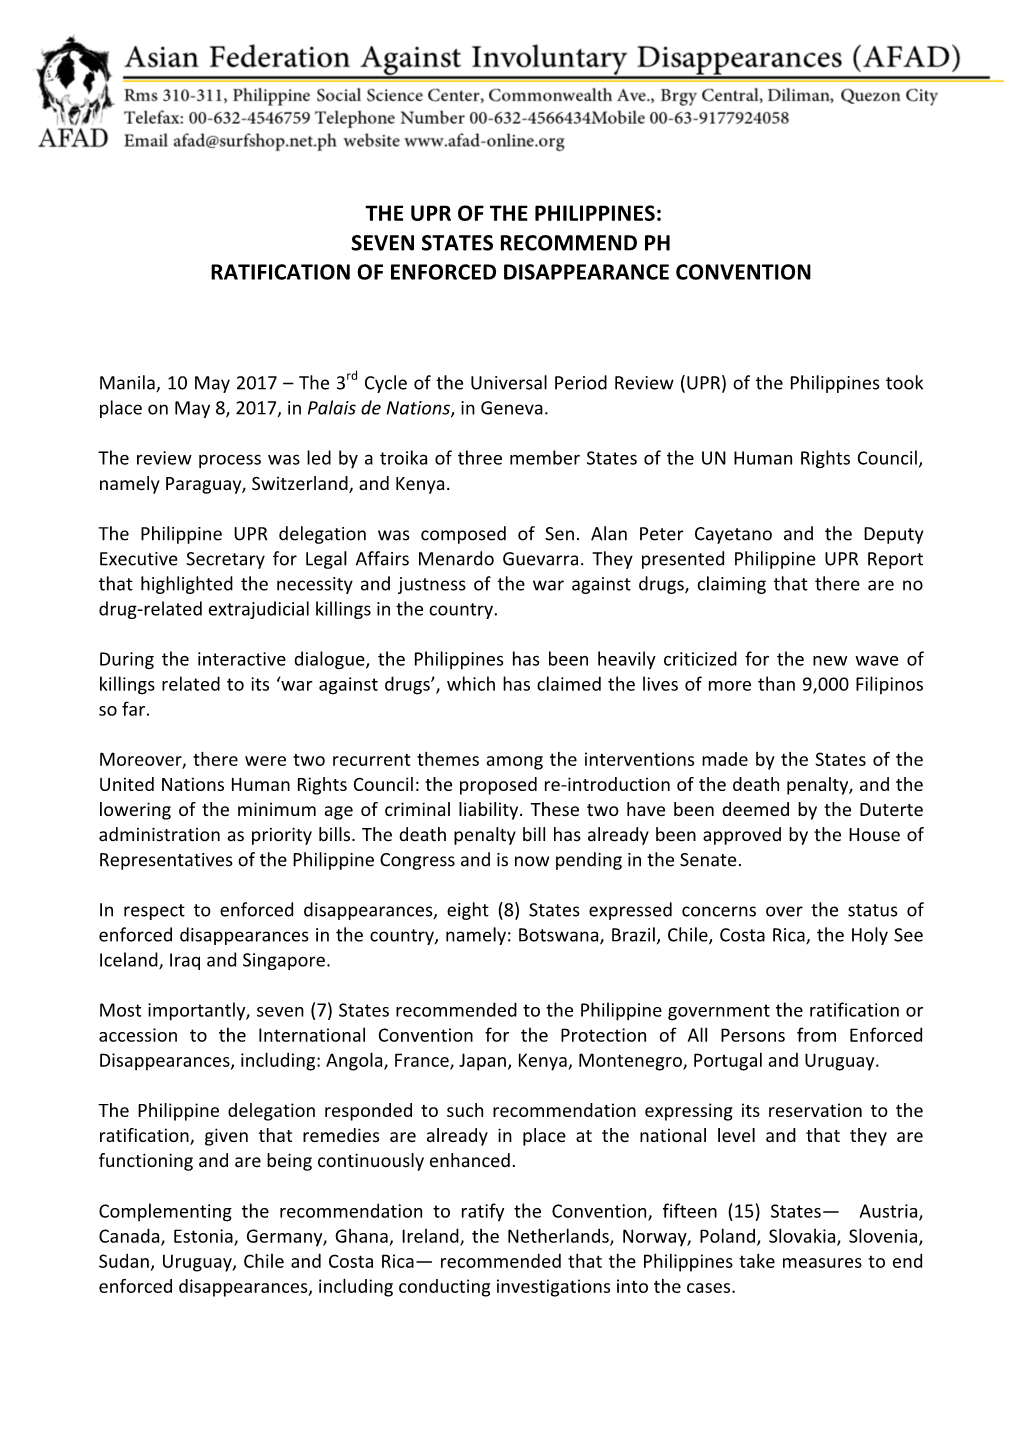 The Upr of the Philippines: Seven States Recommend Ph Ratification of Enforced Disappearance Convention